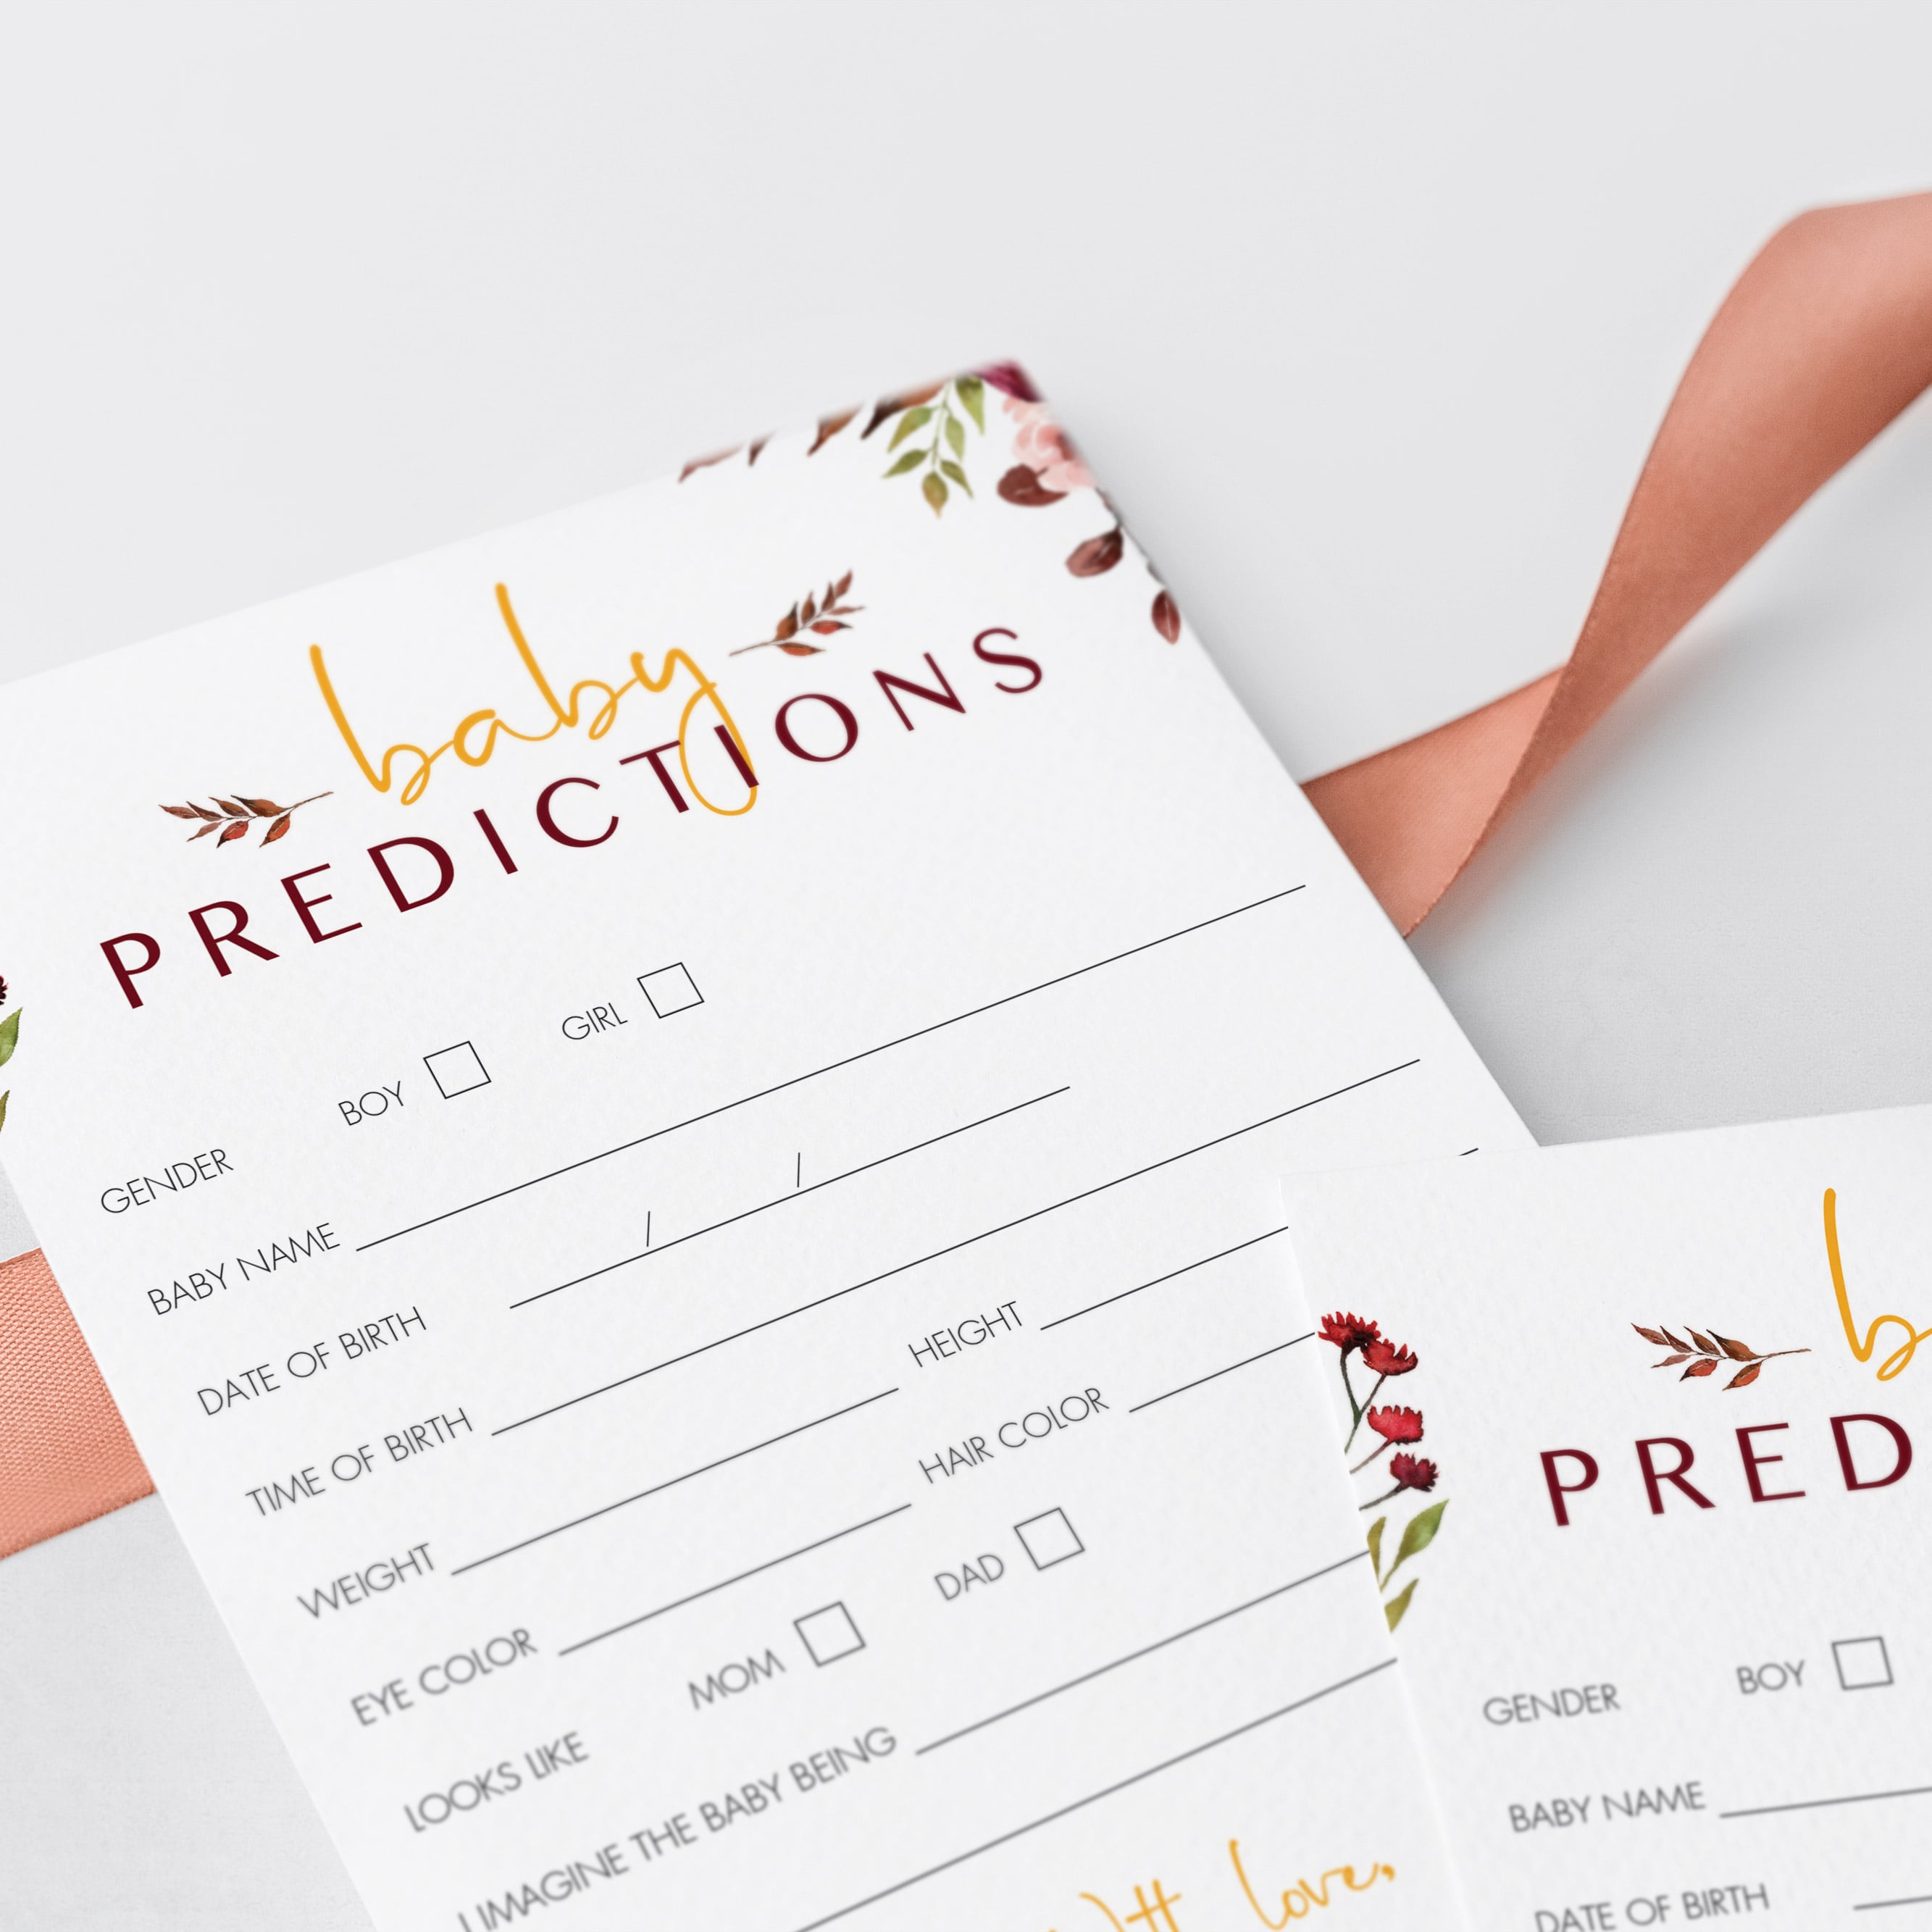 Baby prediction card DIY baby shower by LittleSizzle